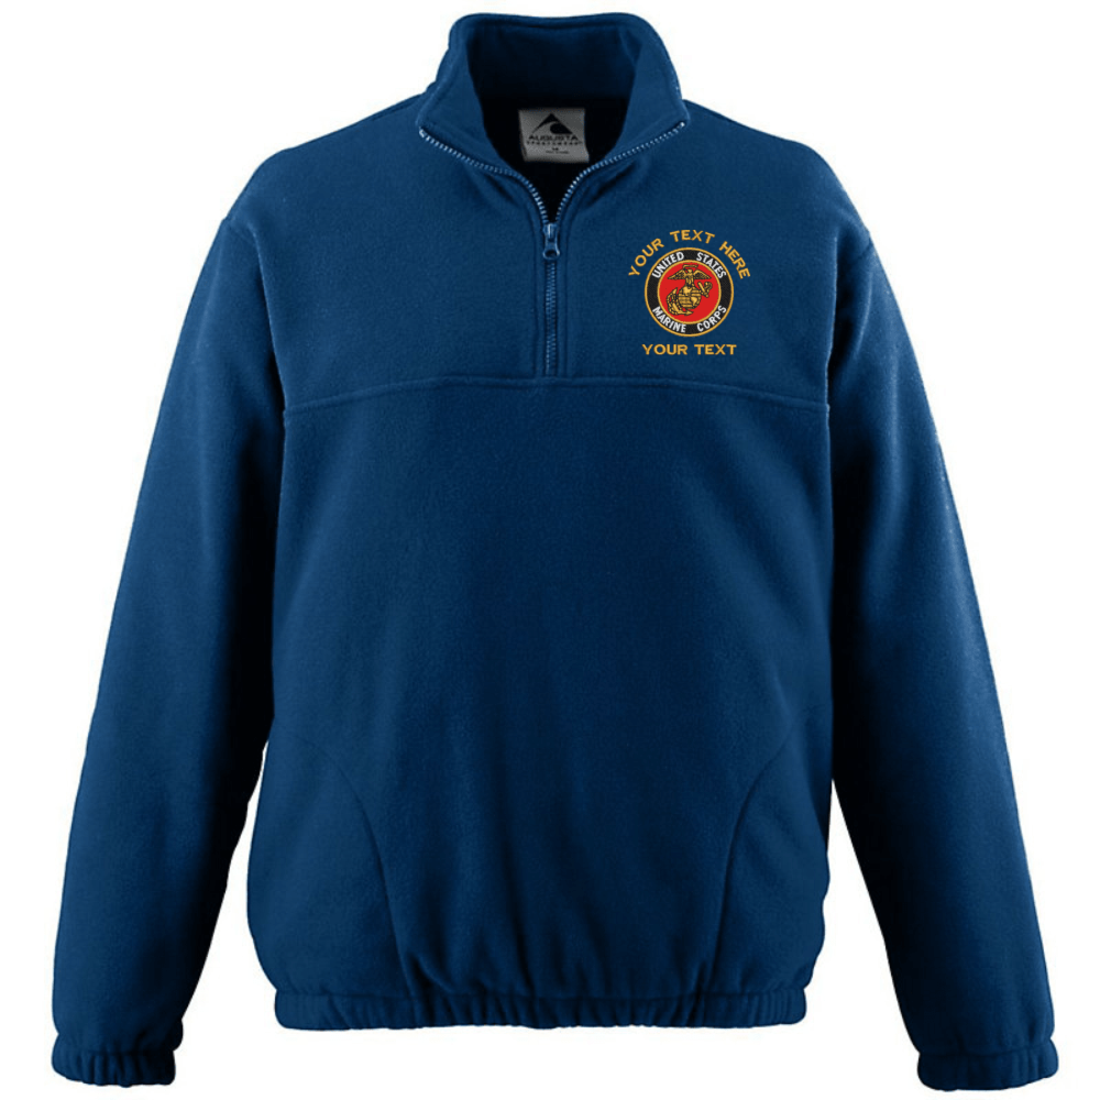 Custom Military Apparel USS Welles DD-628 Embroidered Fleece Jacket Sizes Small-4X 